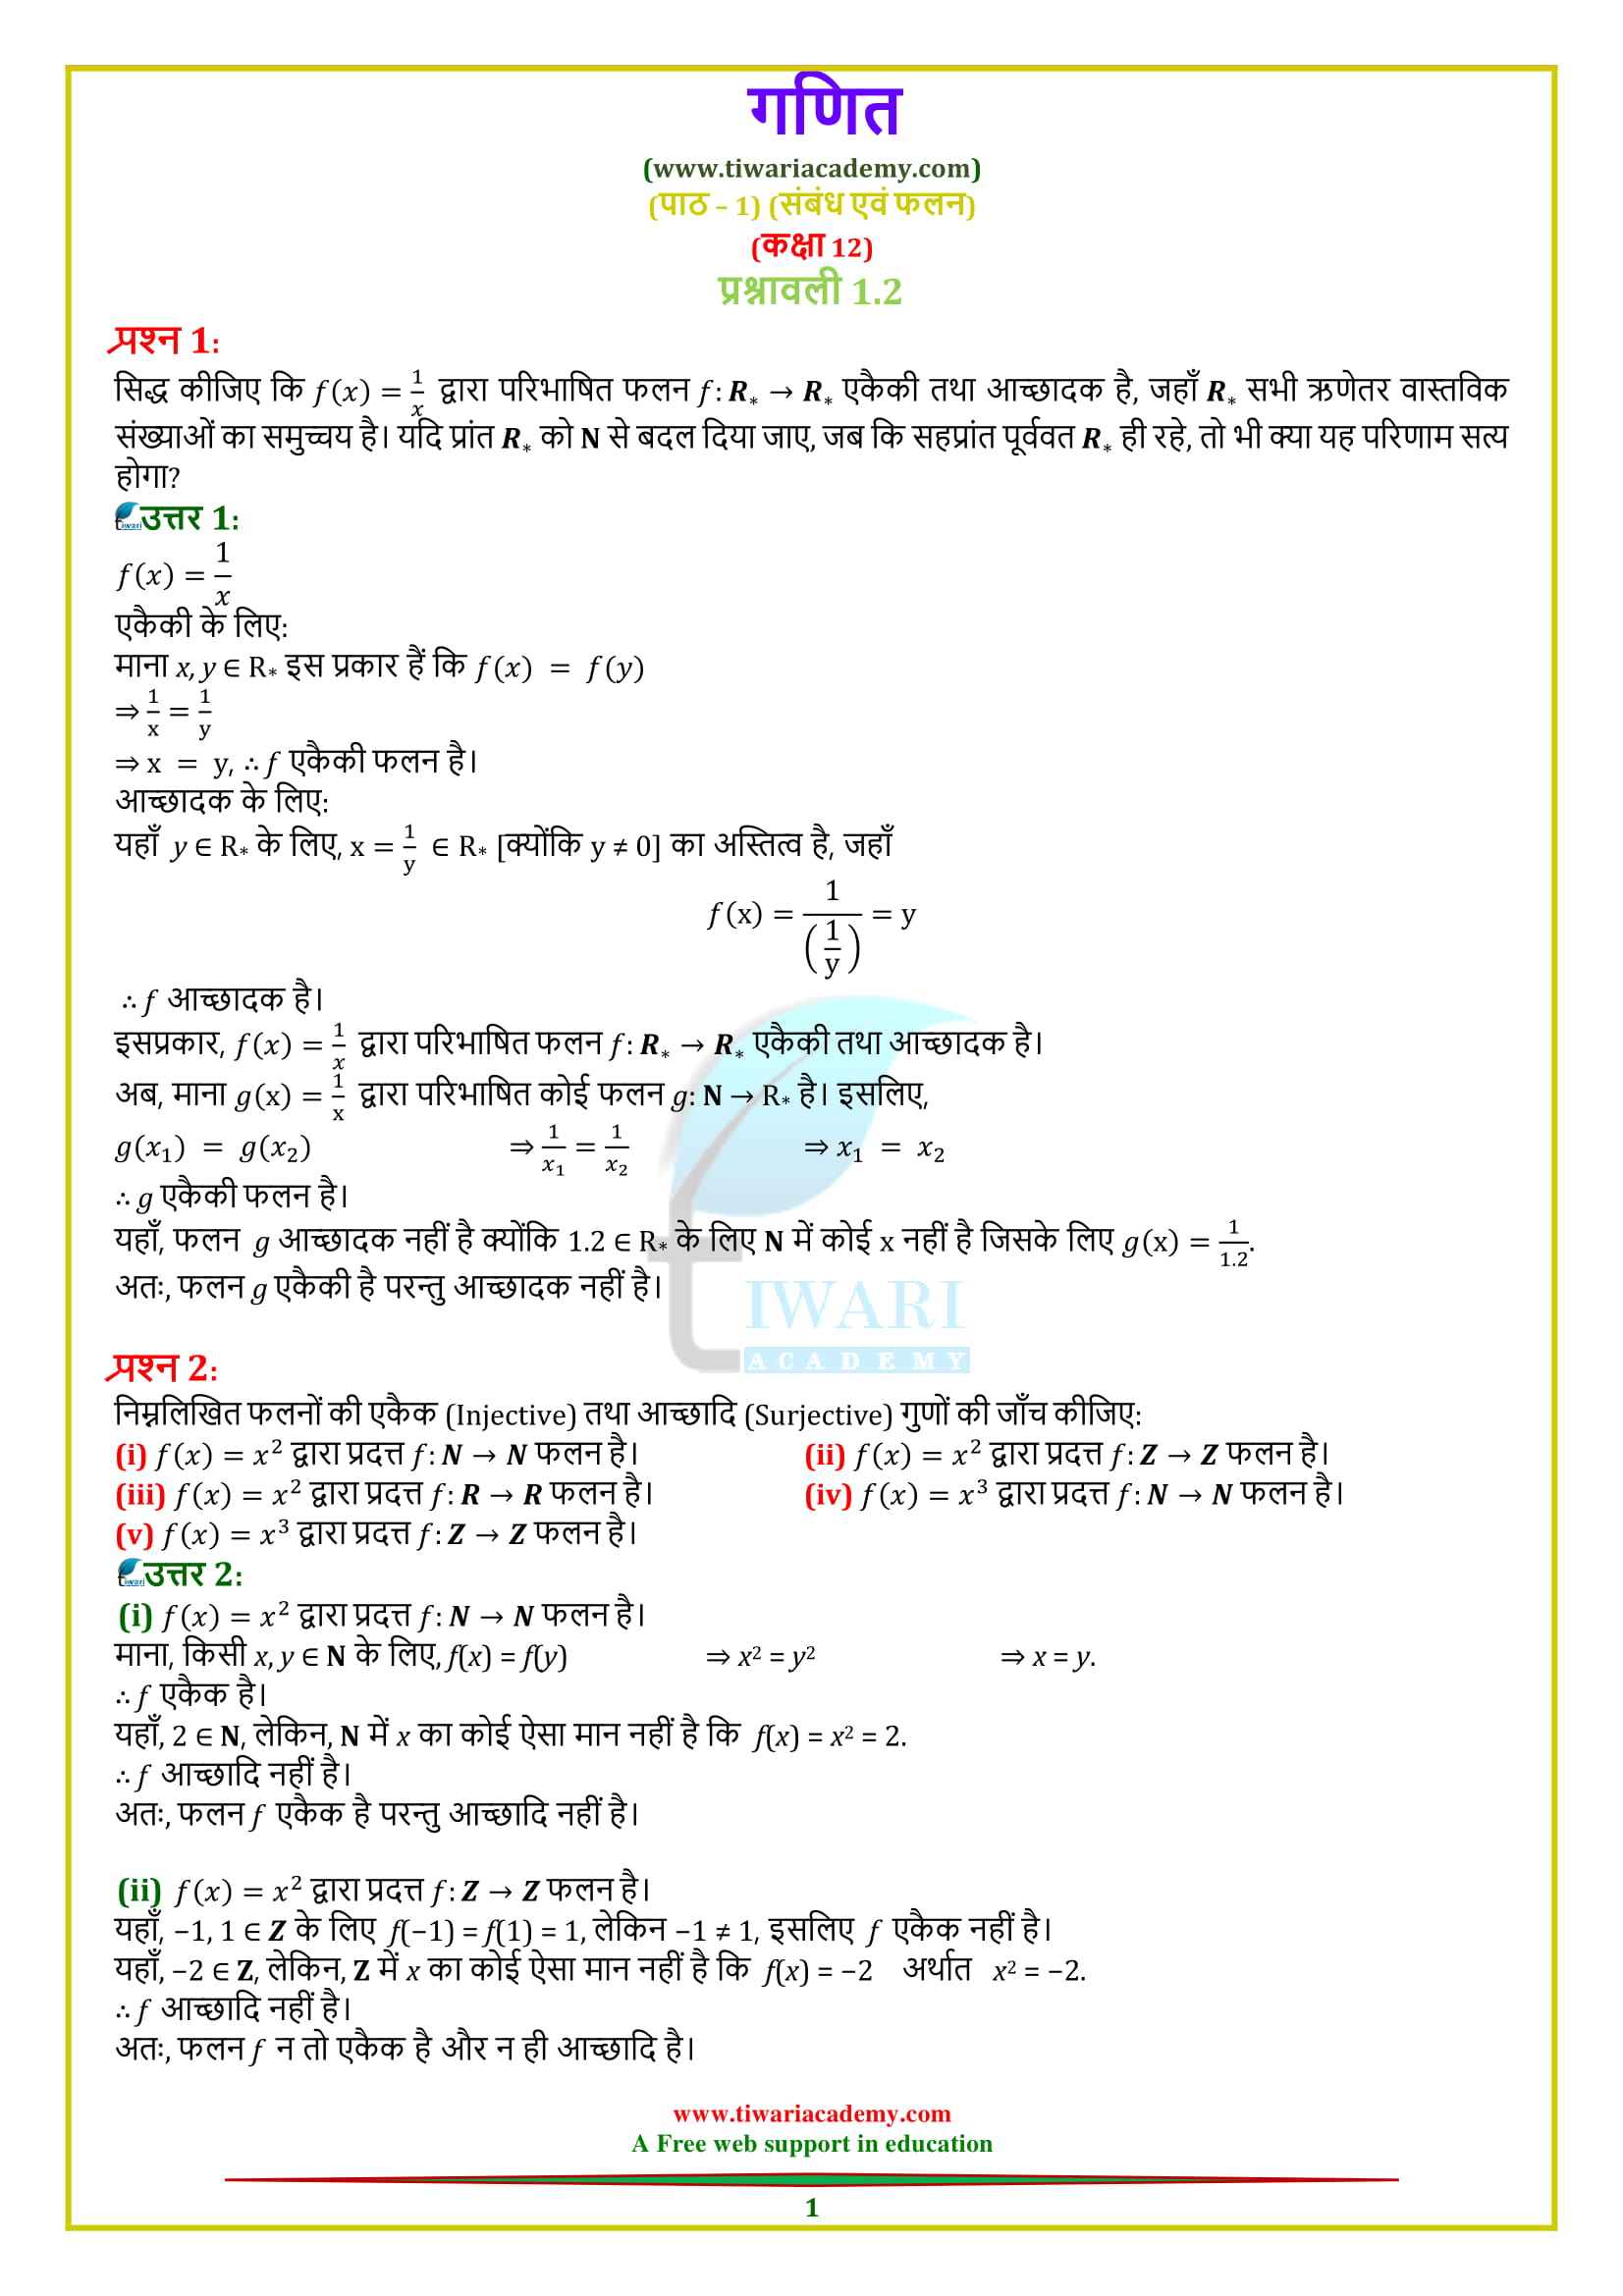 NCERT Solutions for Class 12 Maths Chapter 1 Exercise 1.2 hindi me guide for up baord and mp board.